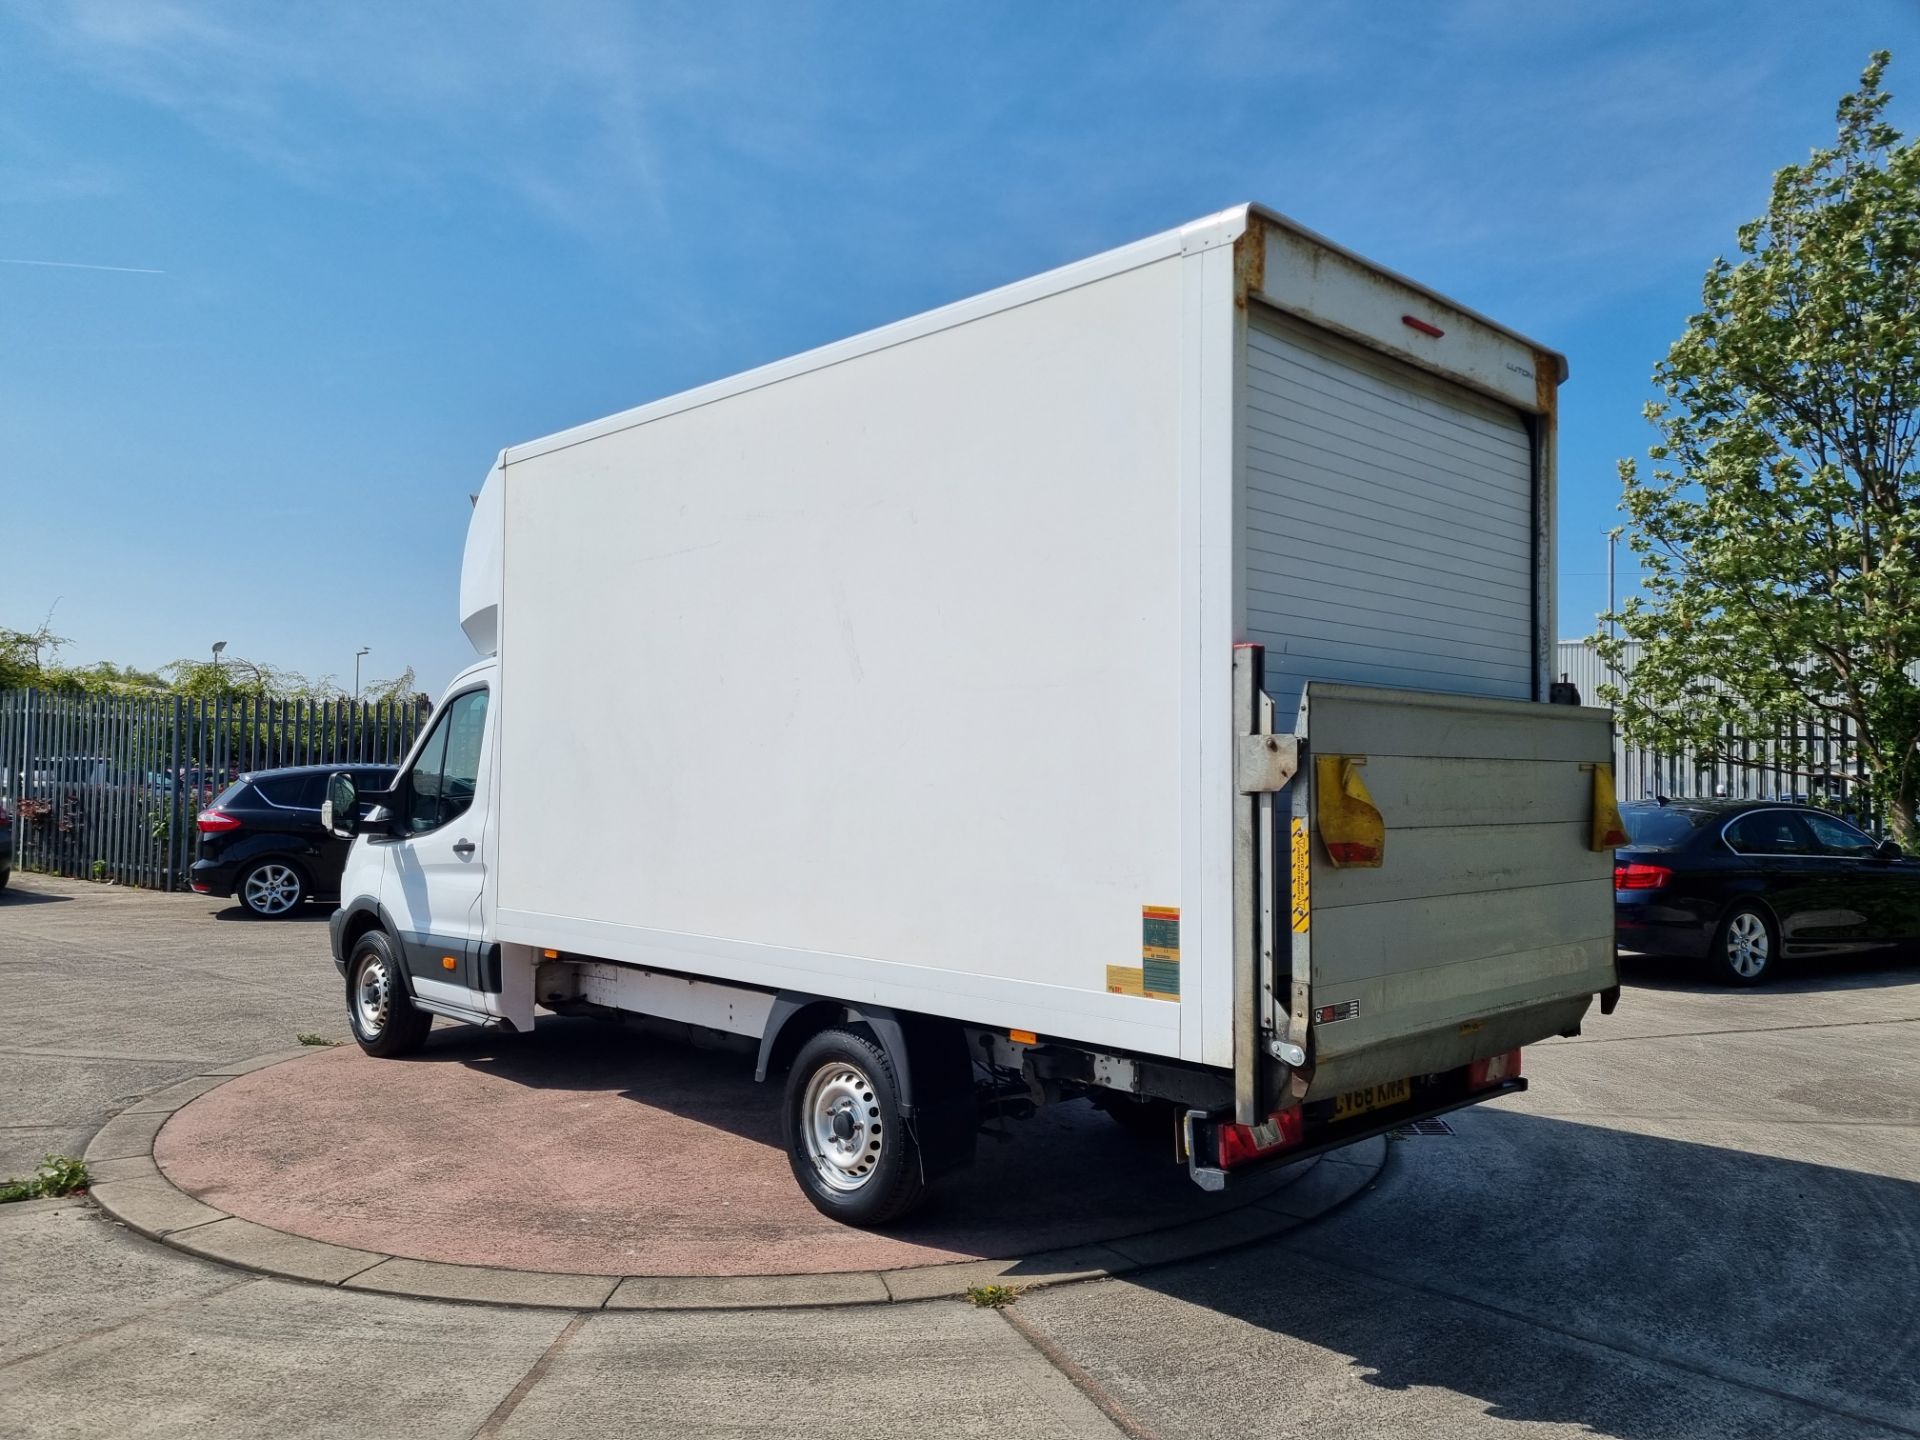 2018 Transit Luton with tail lift - Image 4 of 13